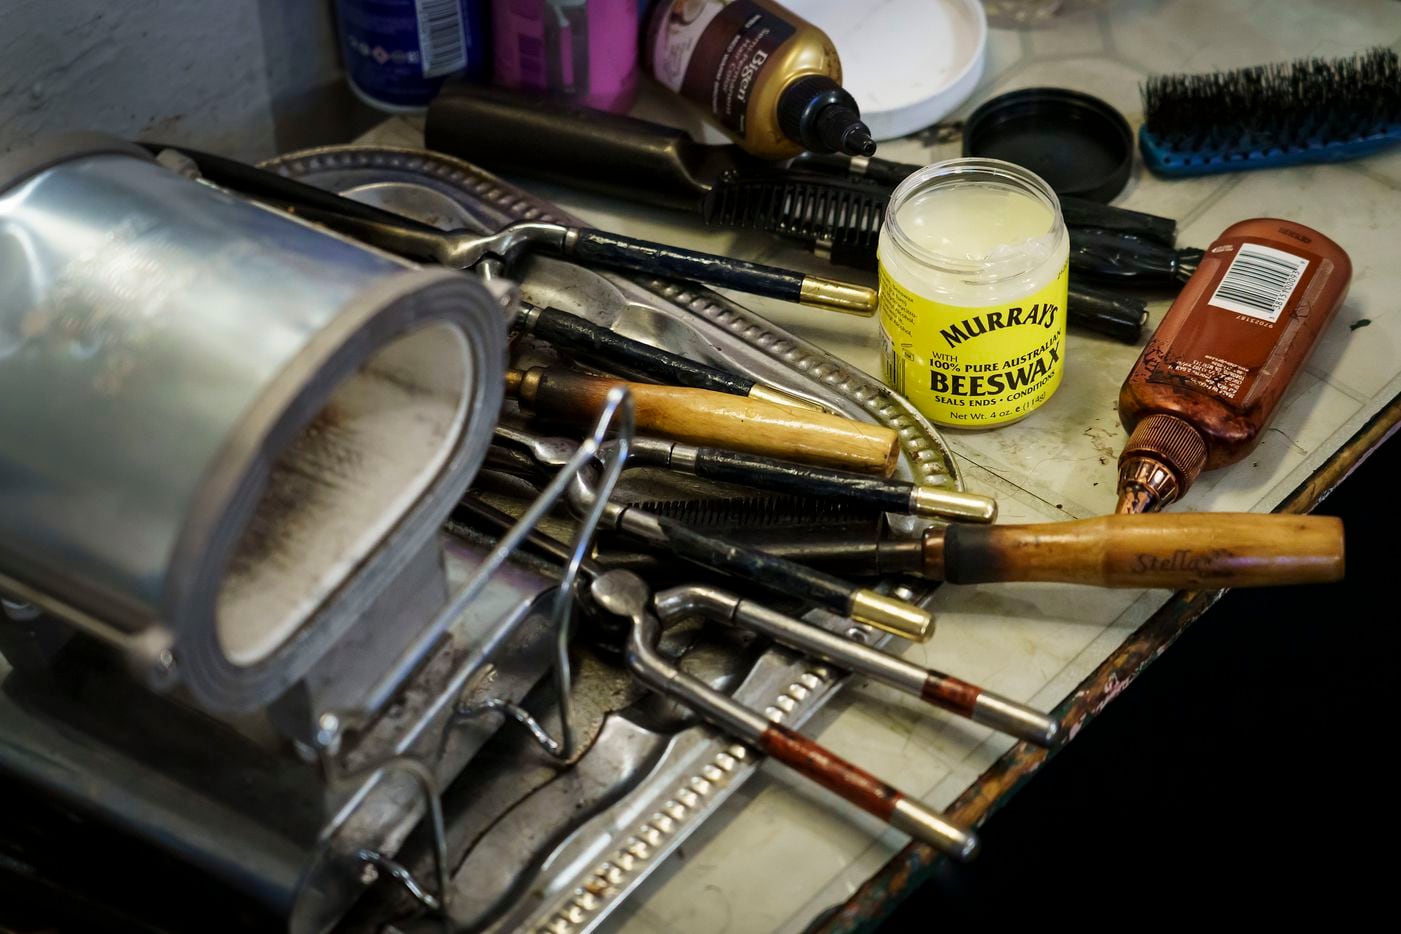 Earnestine Tarrant’s supplies and equipment are seen at her station in her hair salon in South Dallas on her final day working before her retirement.